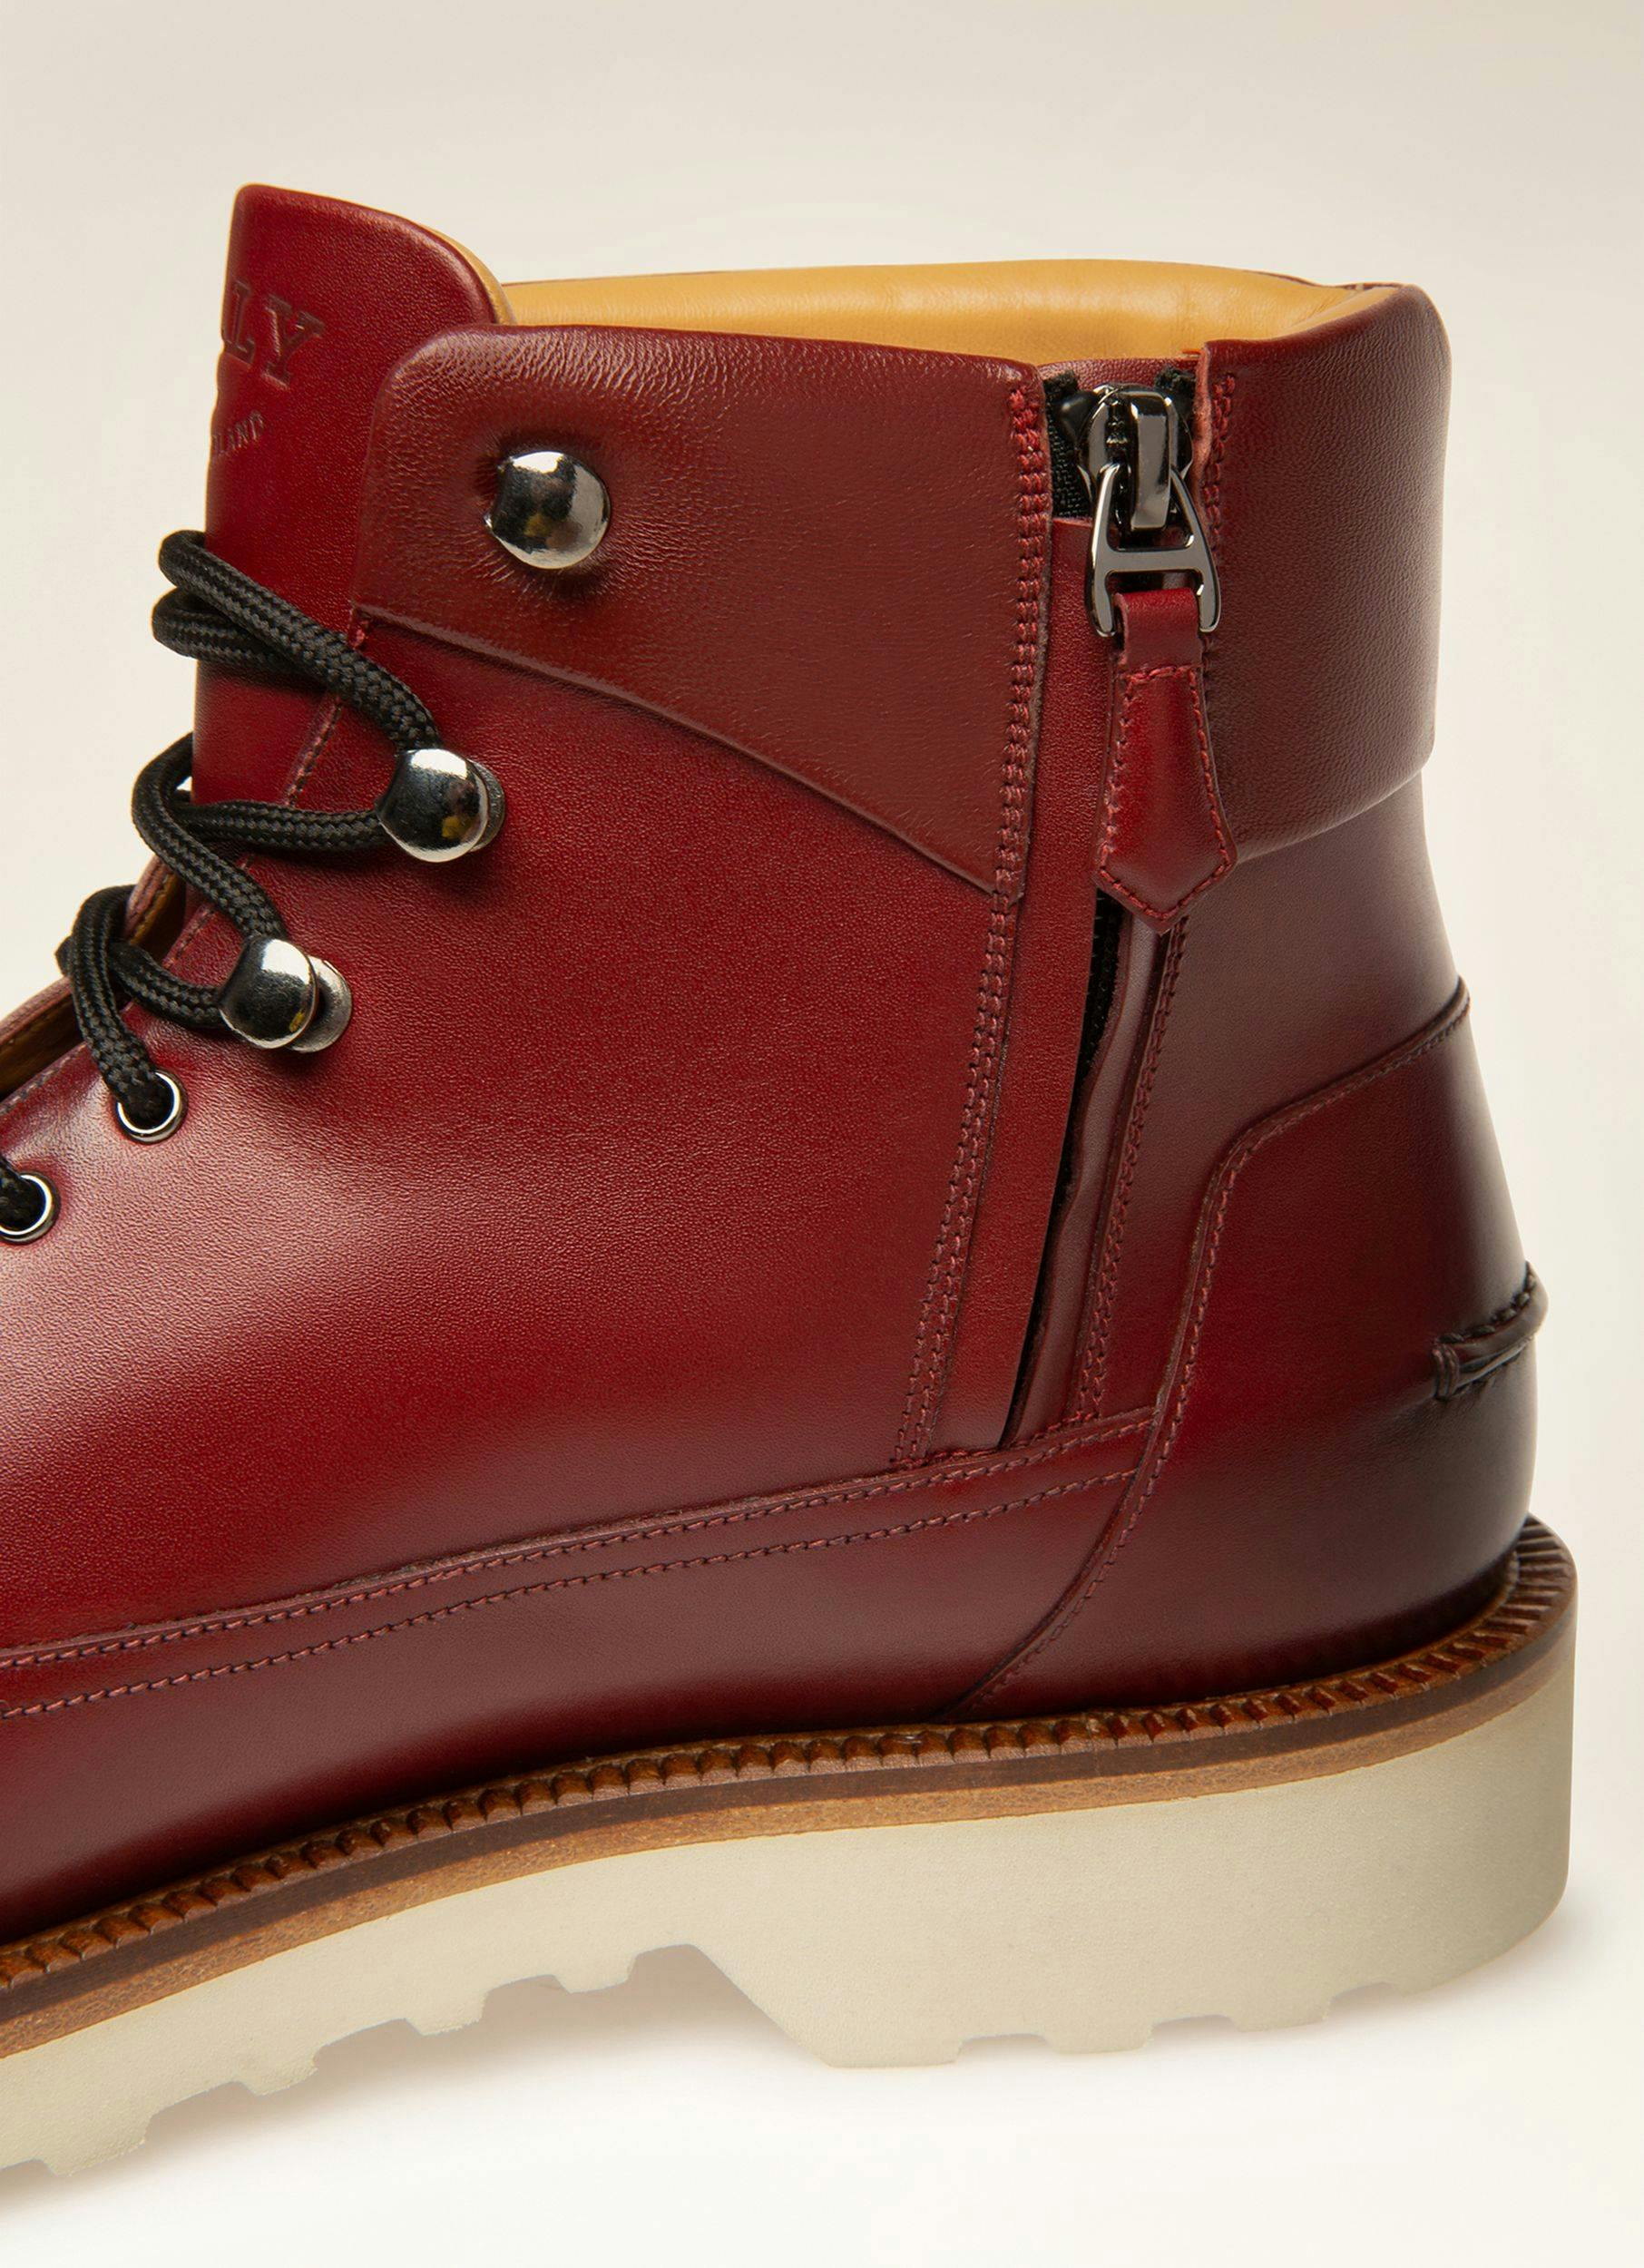 NOTTINGHAM Leather Boots In Heritage Red - Men's - Bally - 02